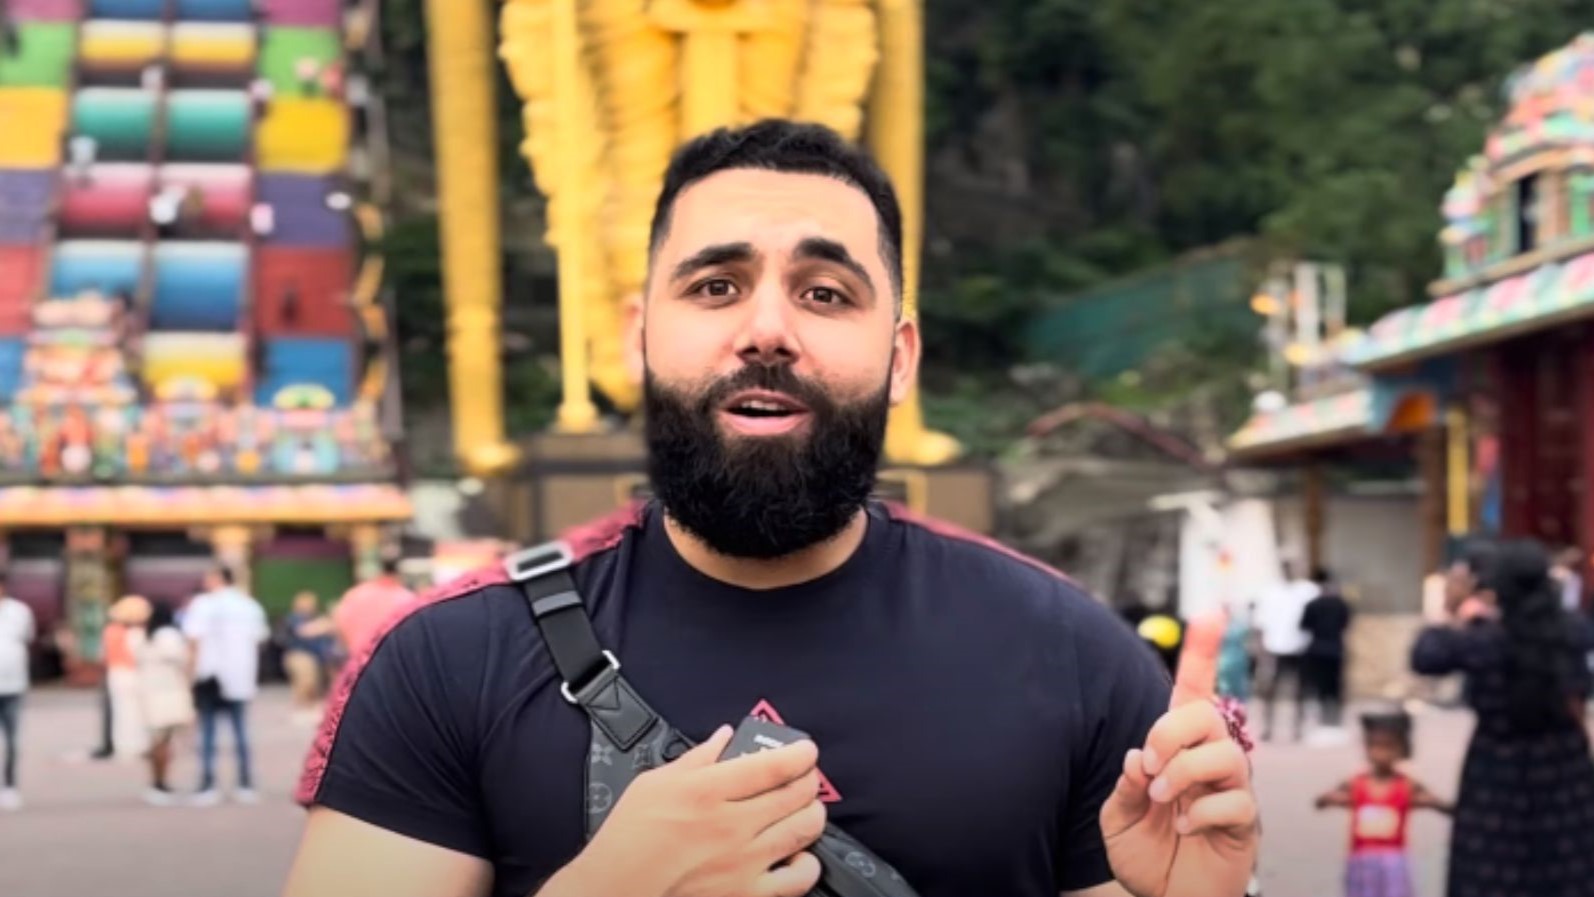 Batu caves clip: despite apology, Moroccan influencer posts extended version of controversial video